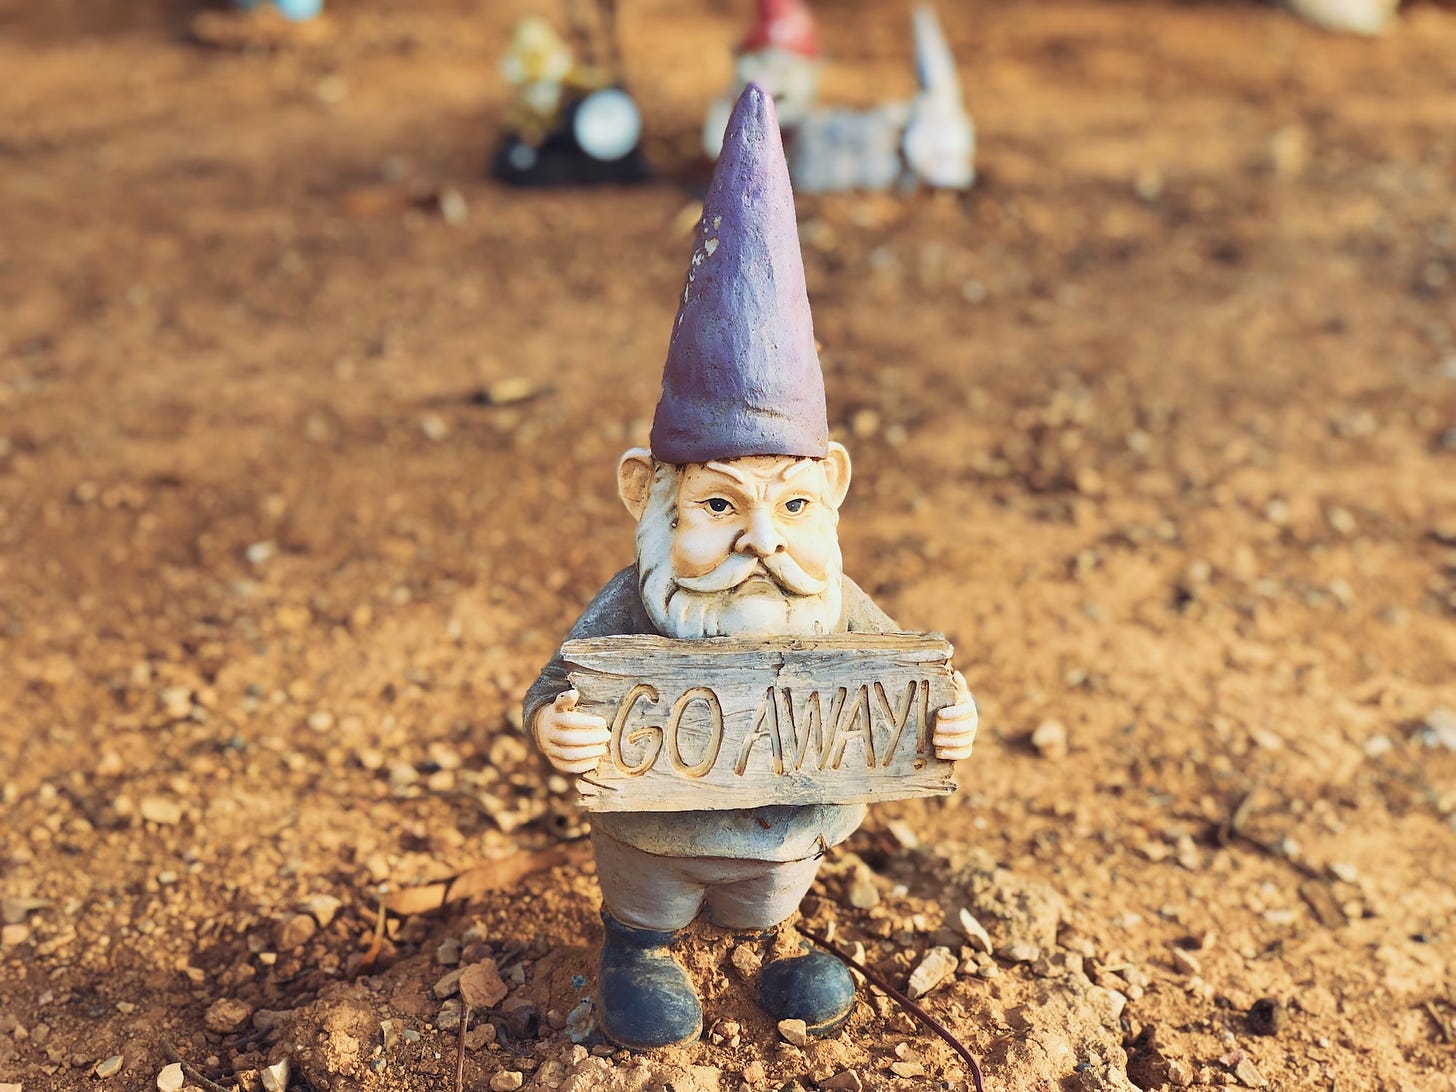 A small garden gnome holding a sign that says "go away!".